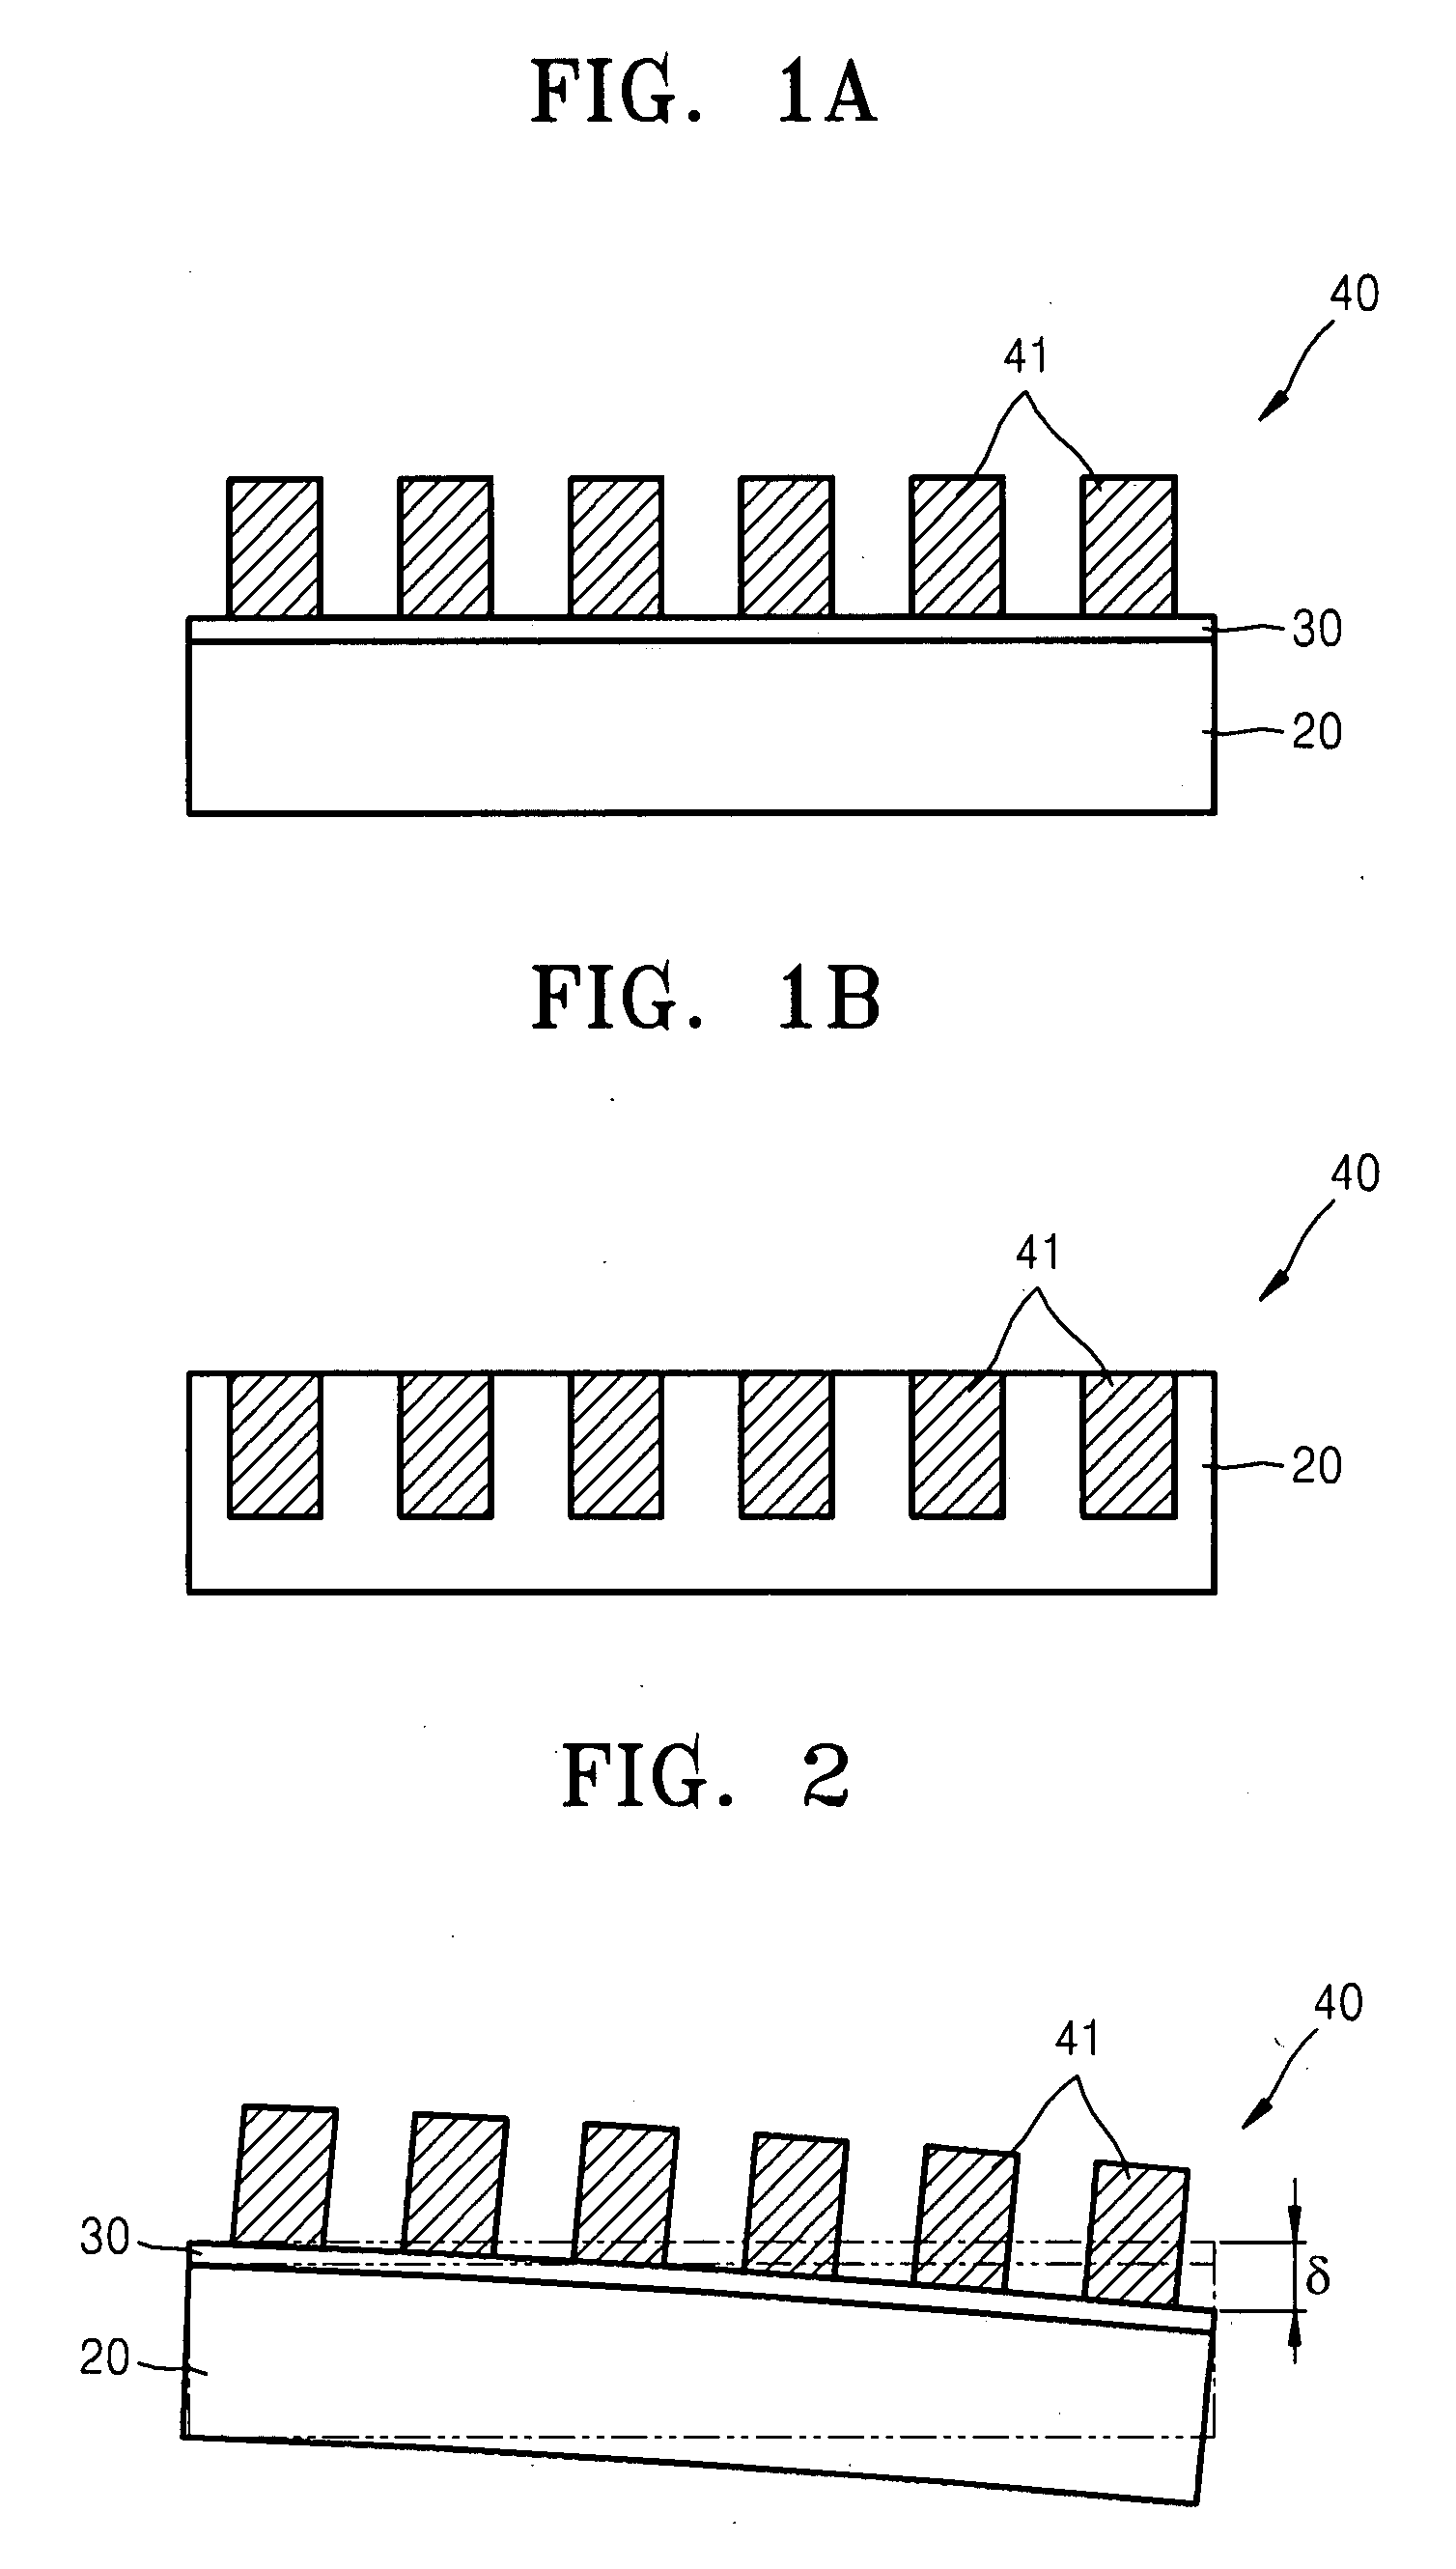 Electromagnetic micro actuator and method of manufacturing the same